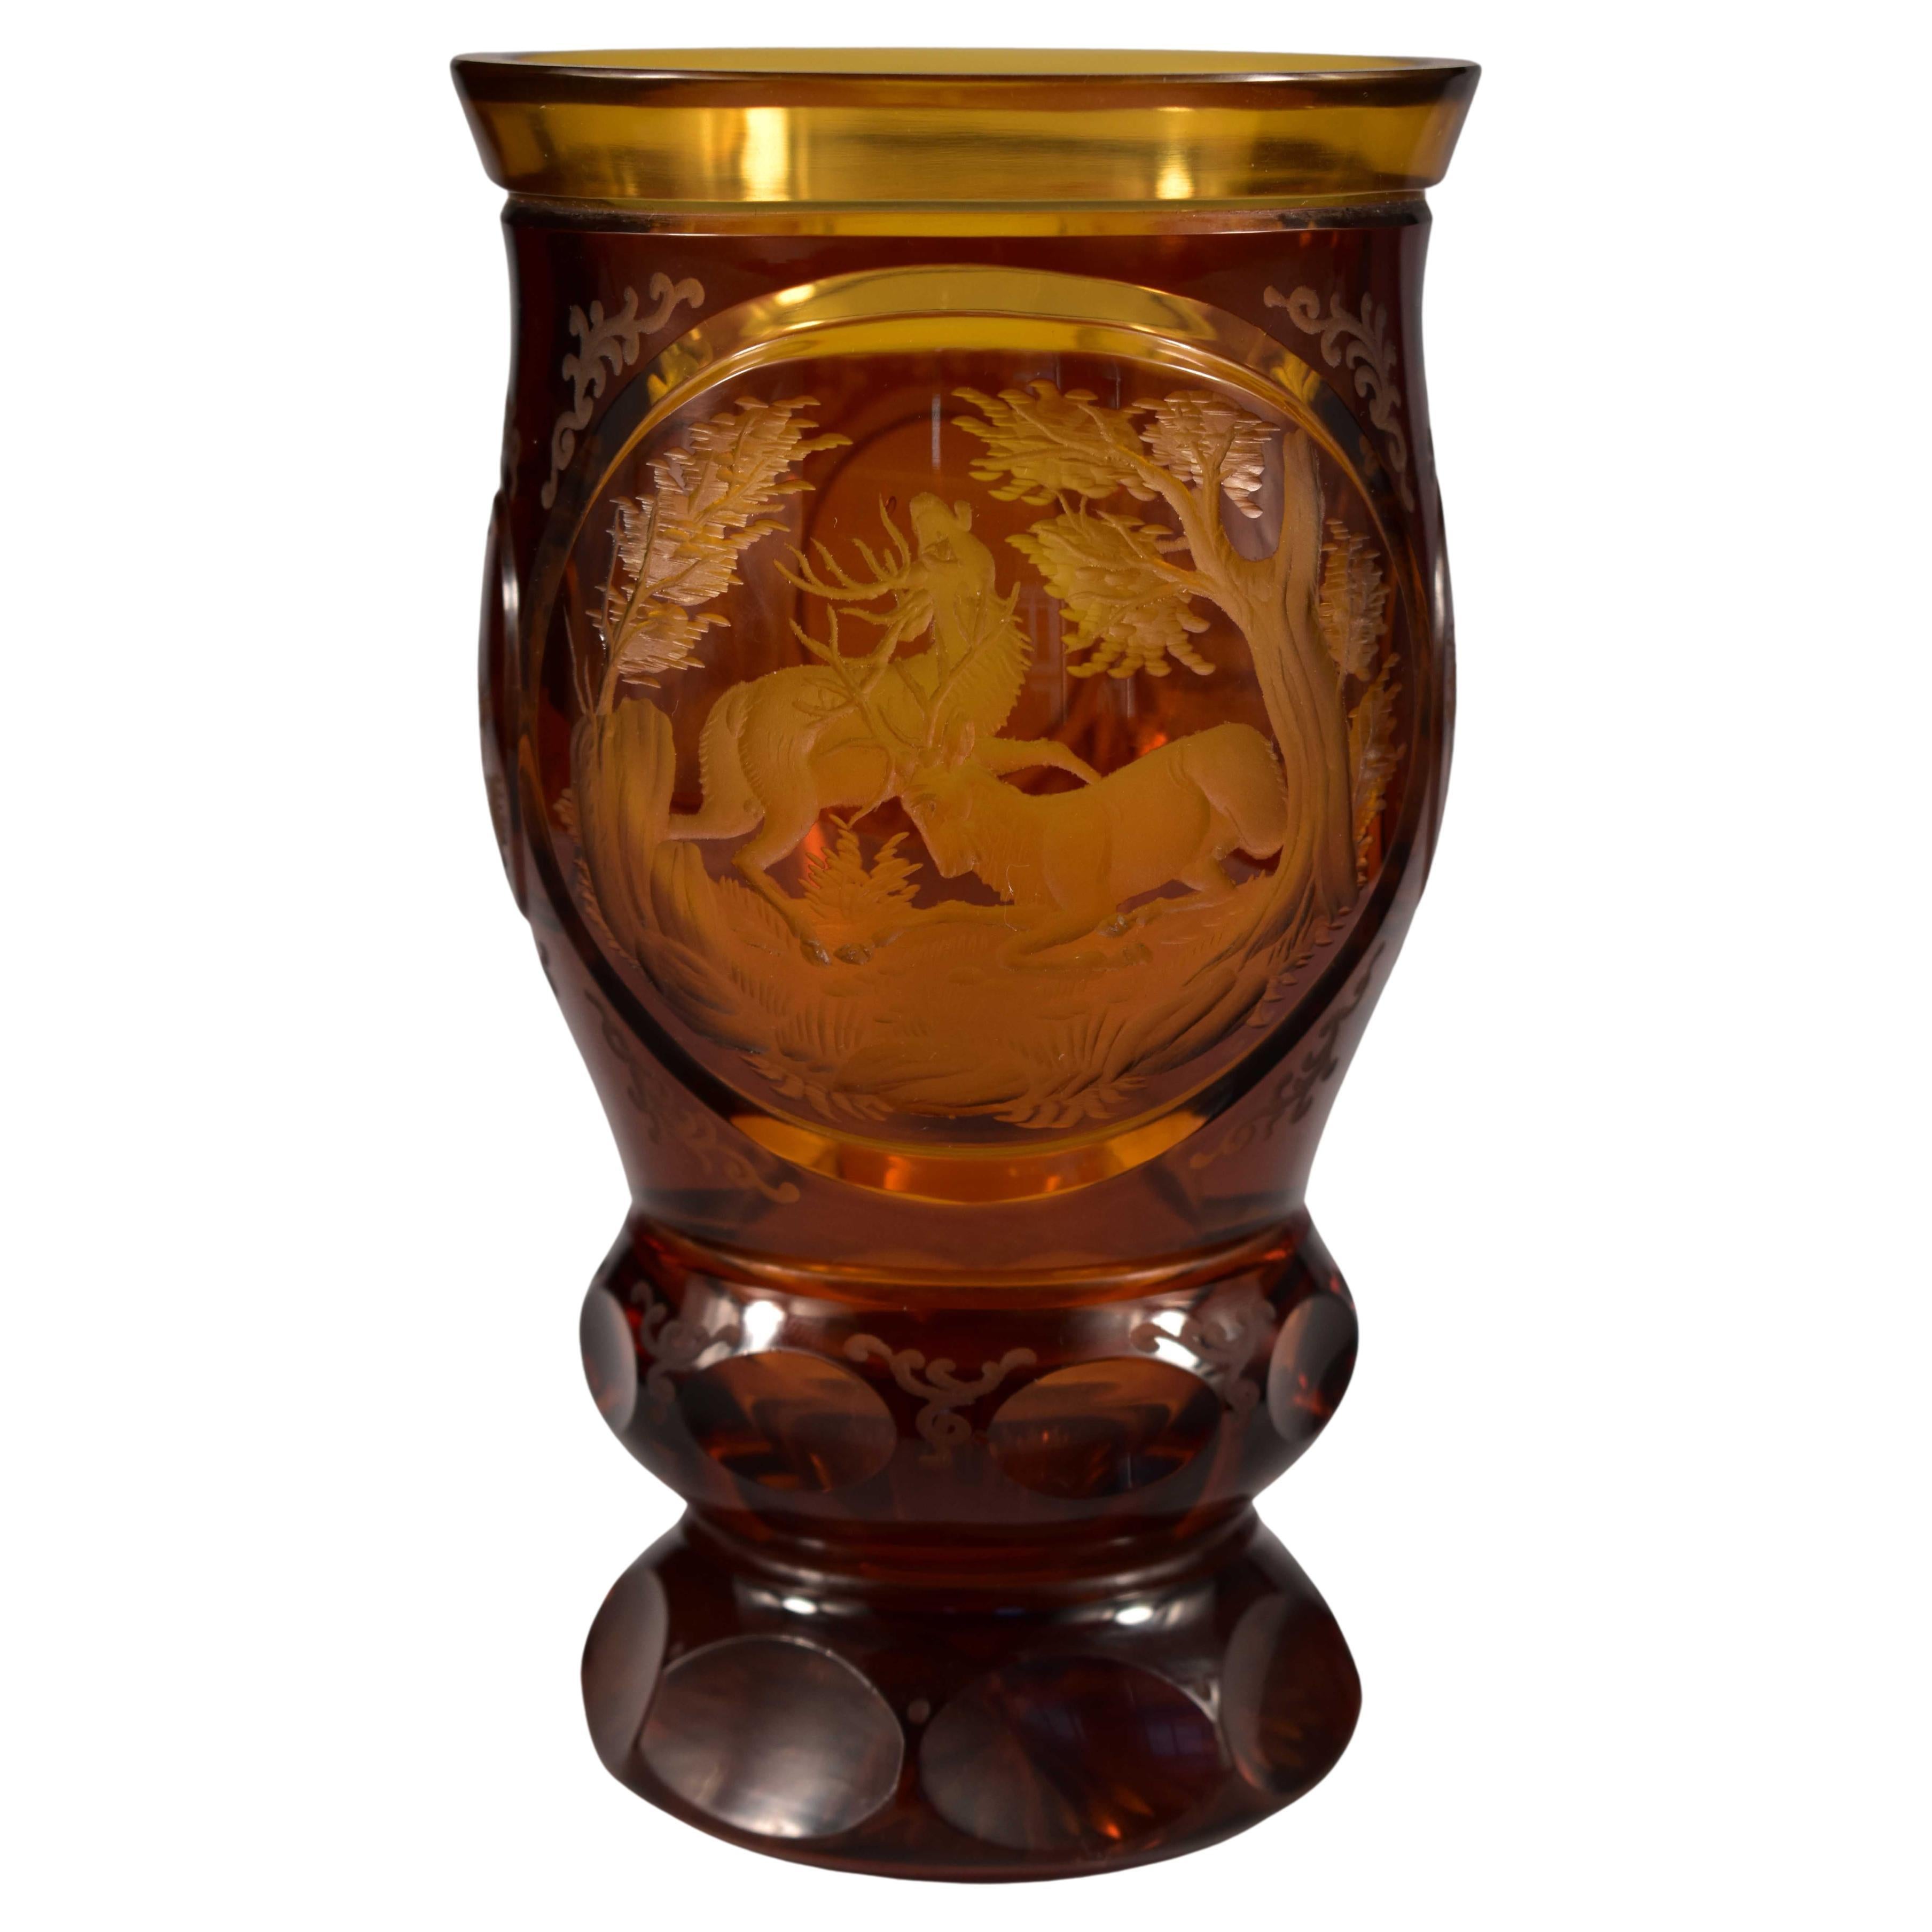 Engraved Amber Glass Goblet, Hunting Motif, Bohemian Glass 20th Century